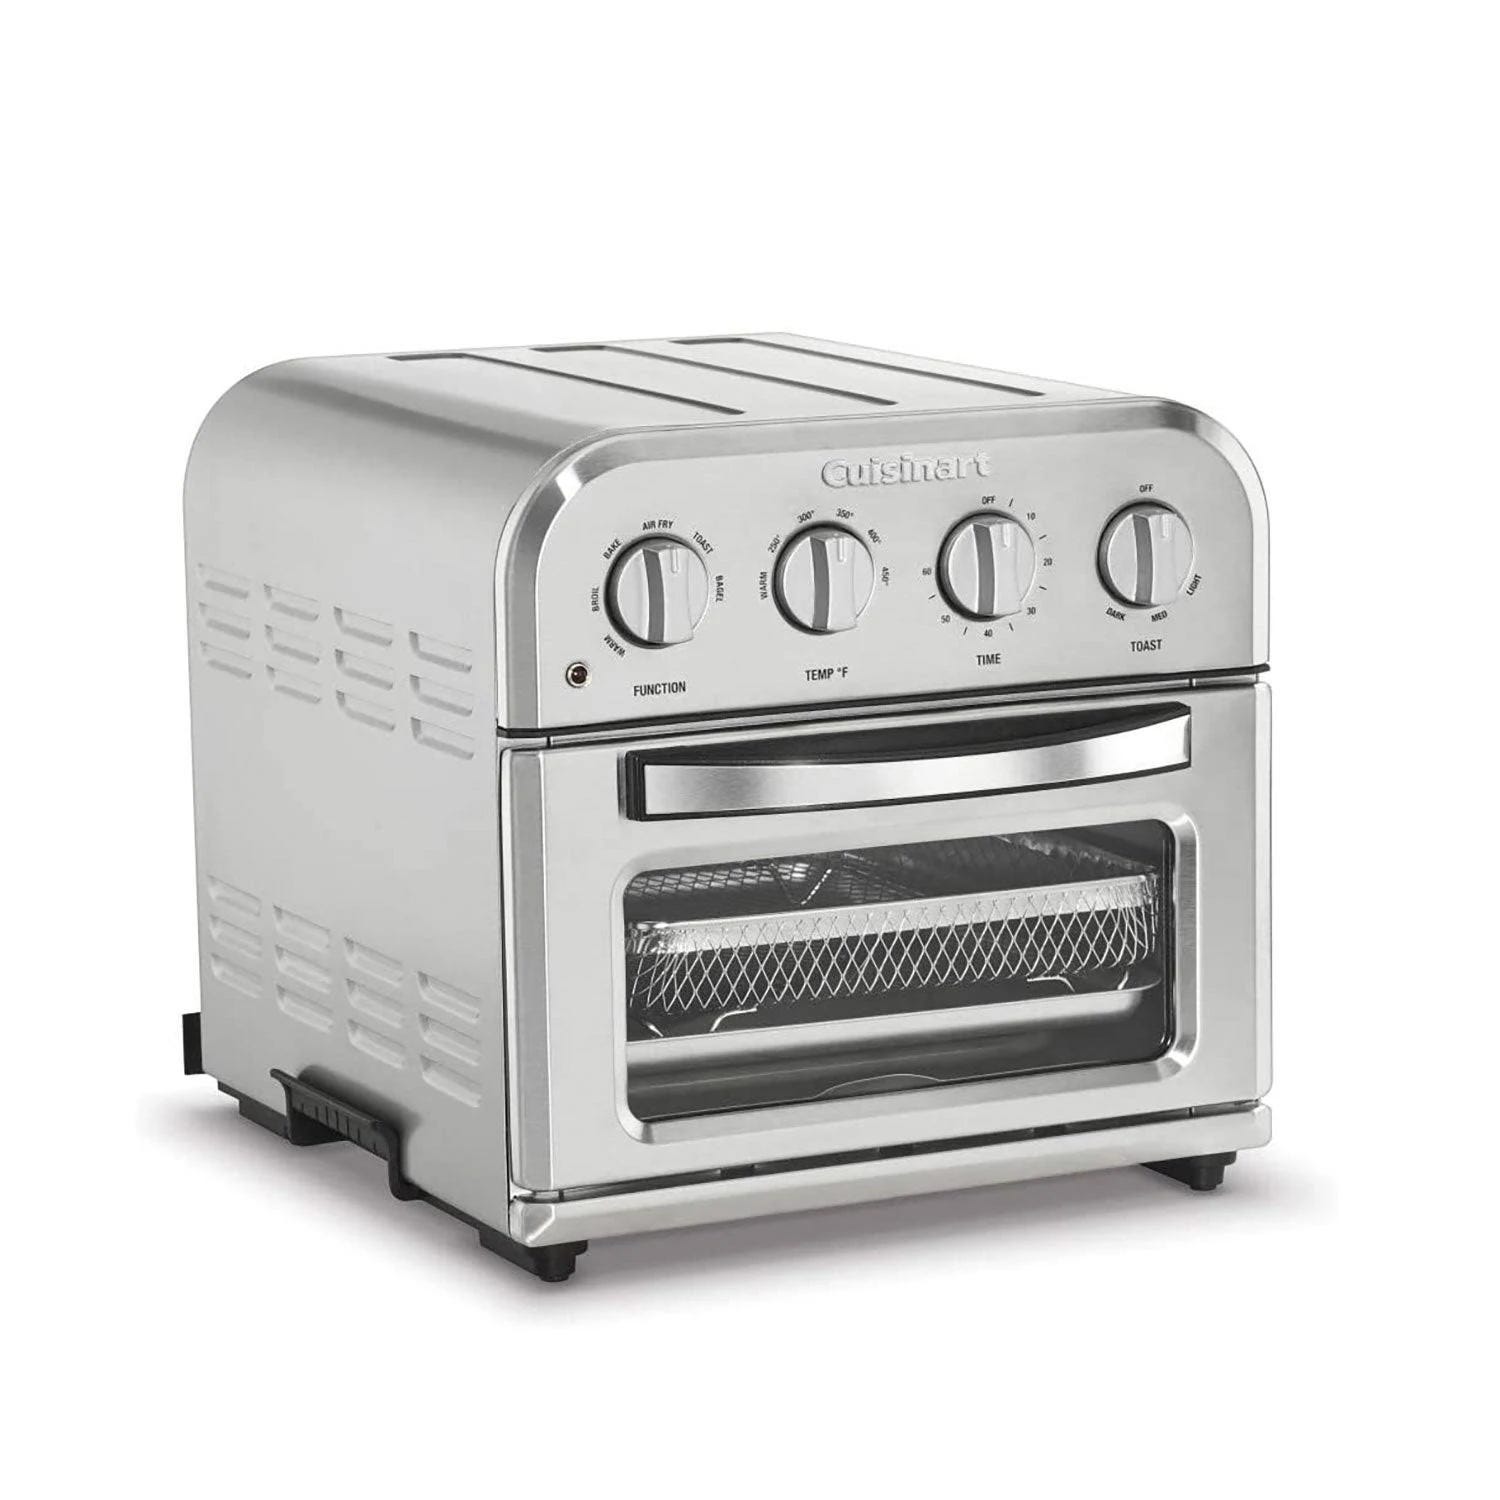 Cuisinart Compact Air Fryer Toaster Oven | Image